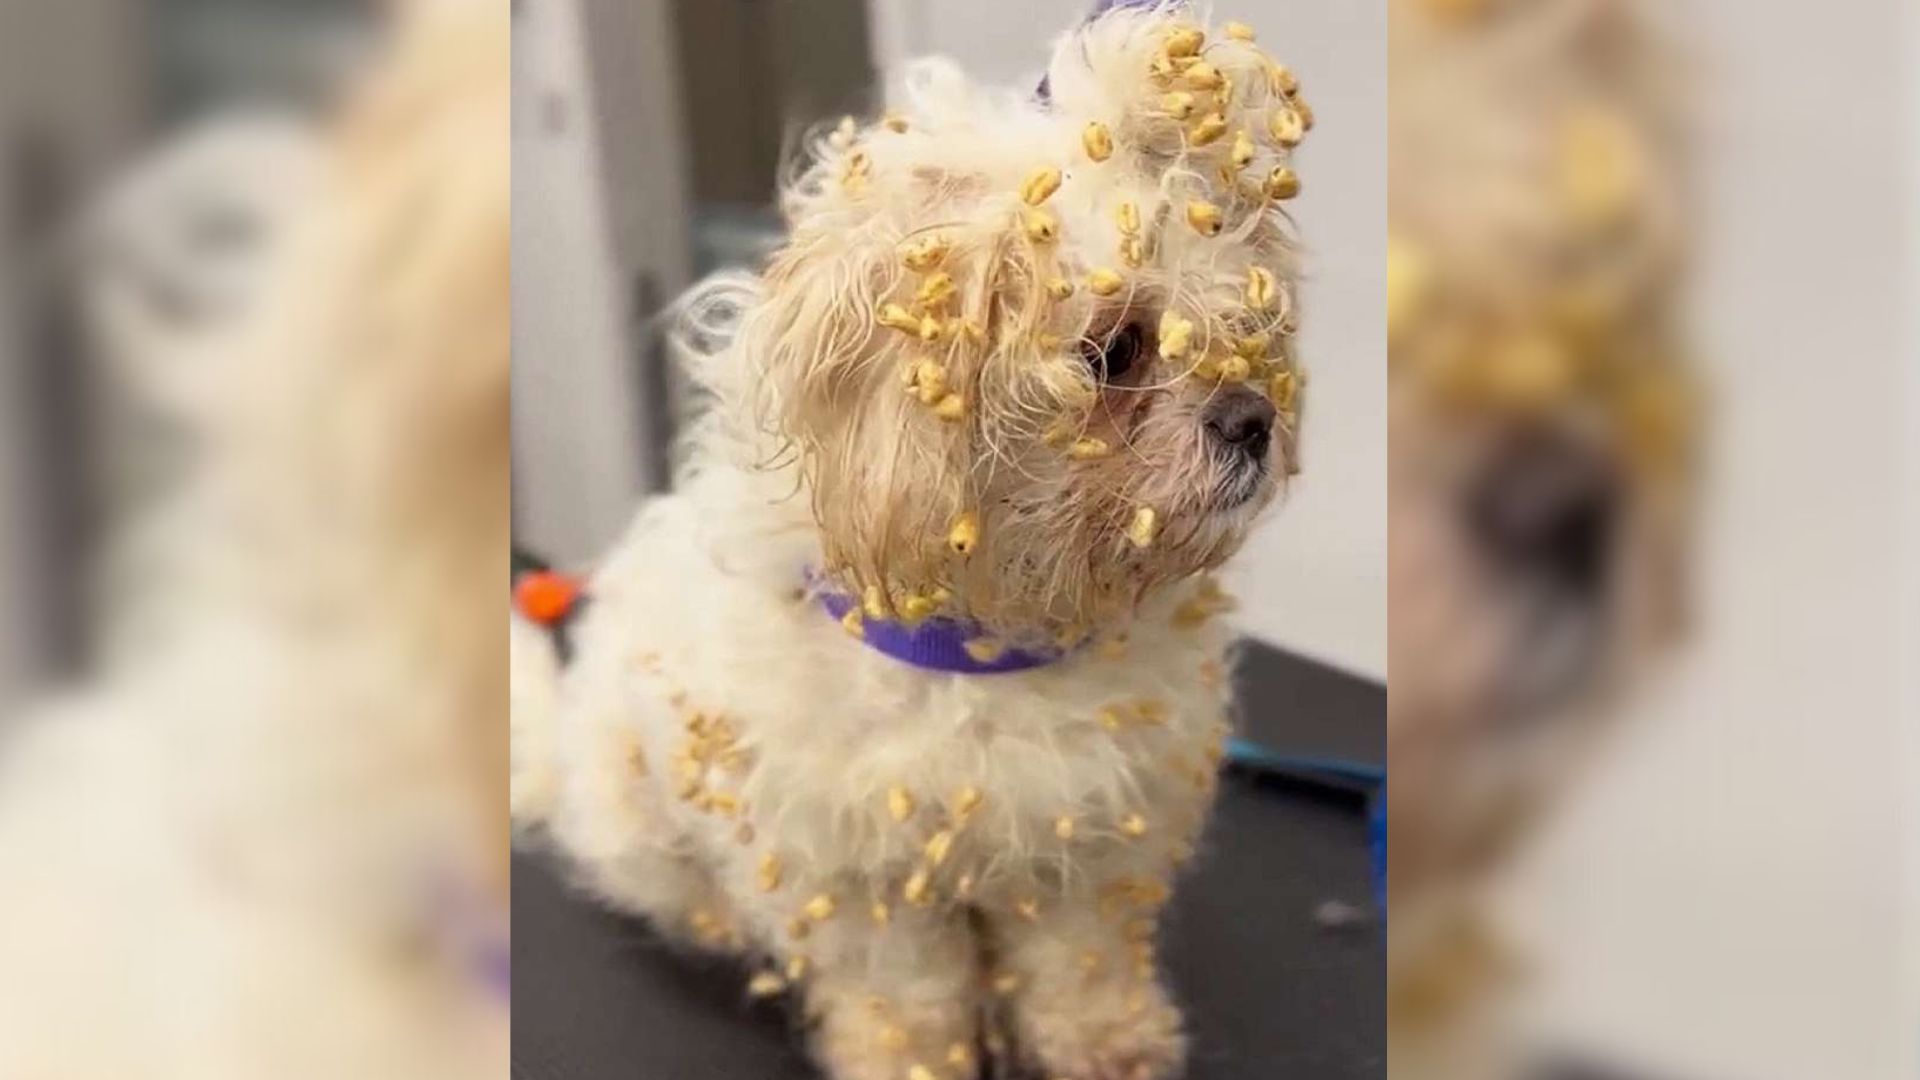 A Mischievous Dog Turns Into A Cereal Mess After “Invading” A Box Of Sugar Puffs